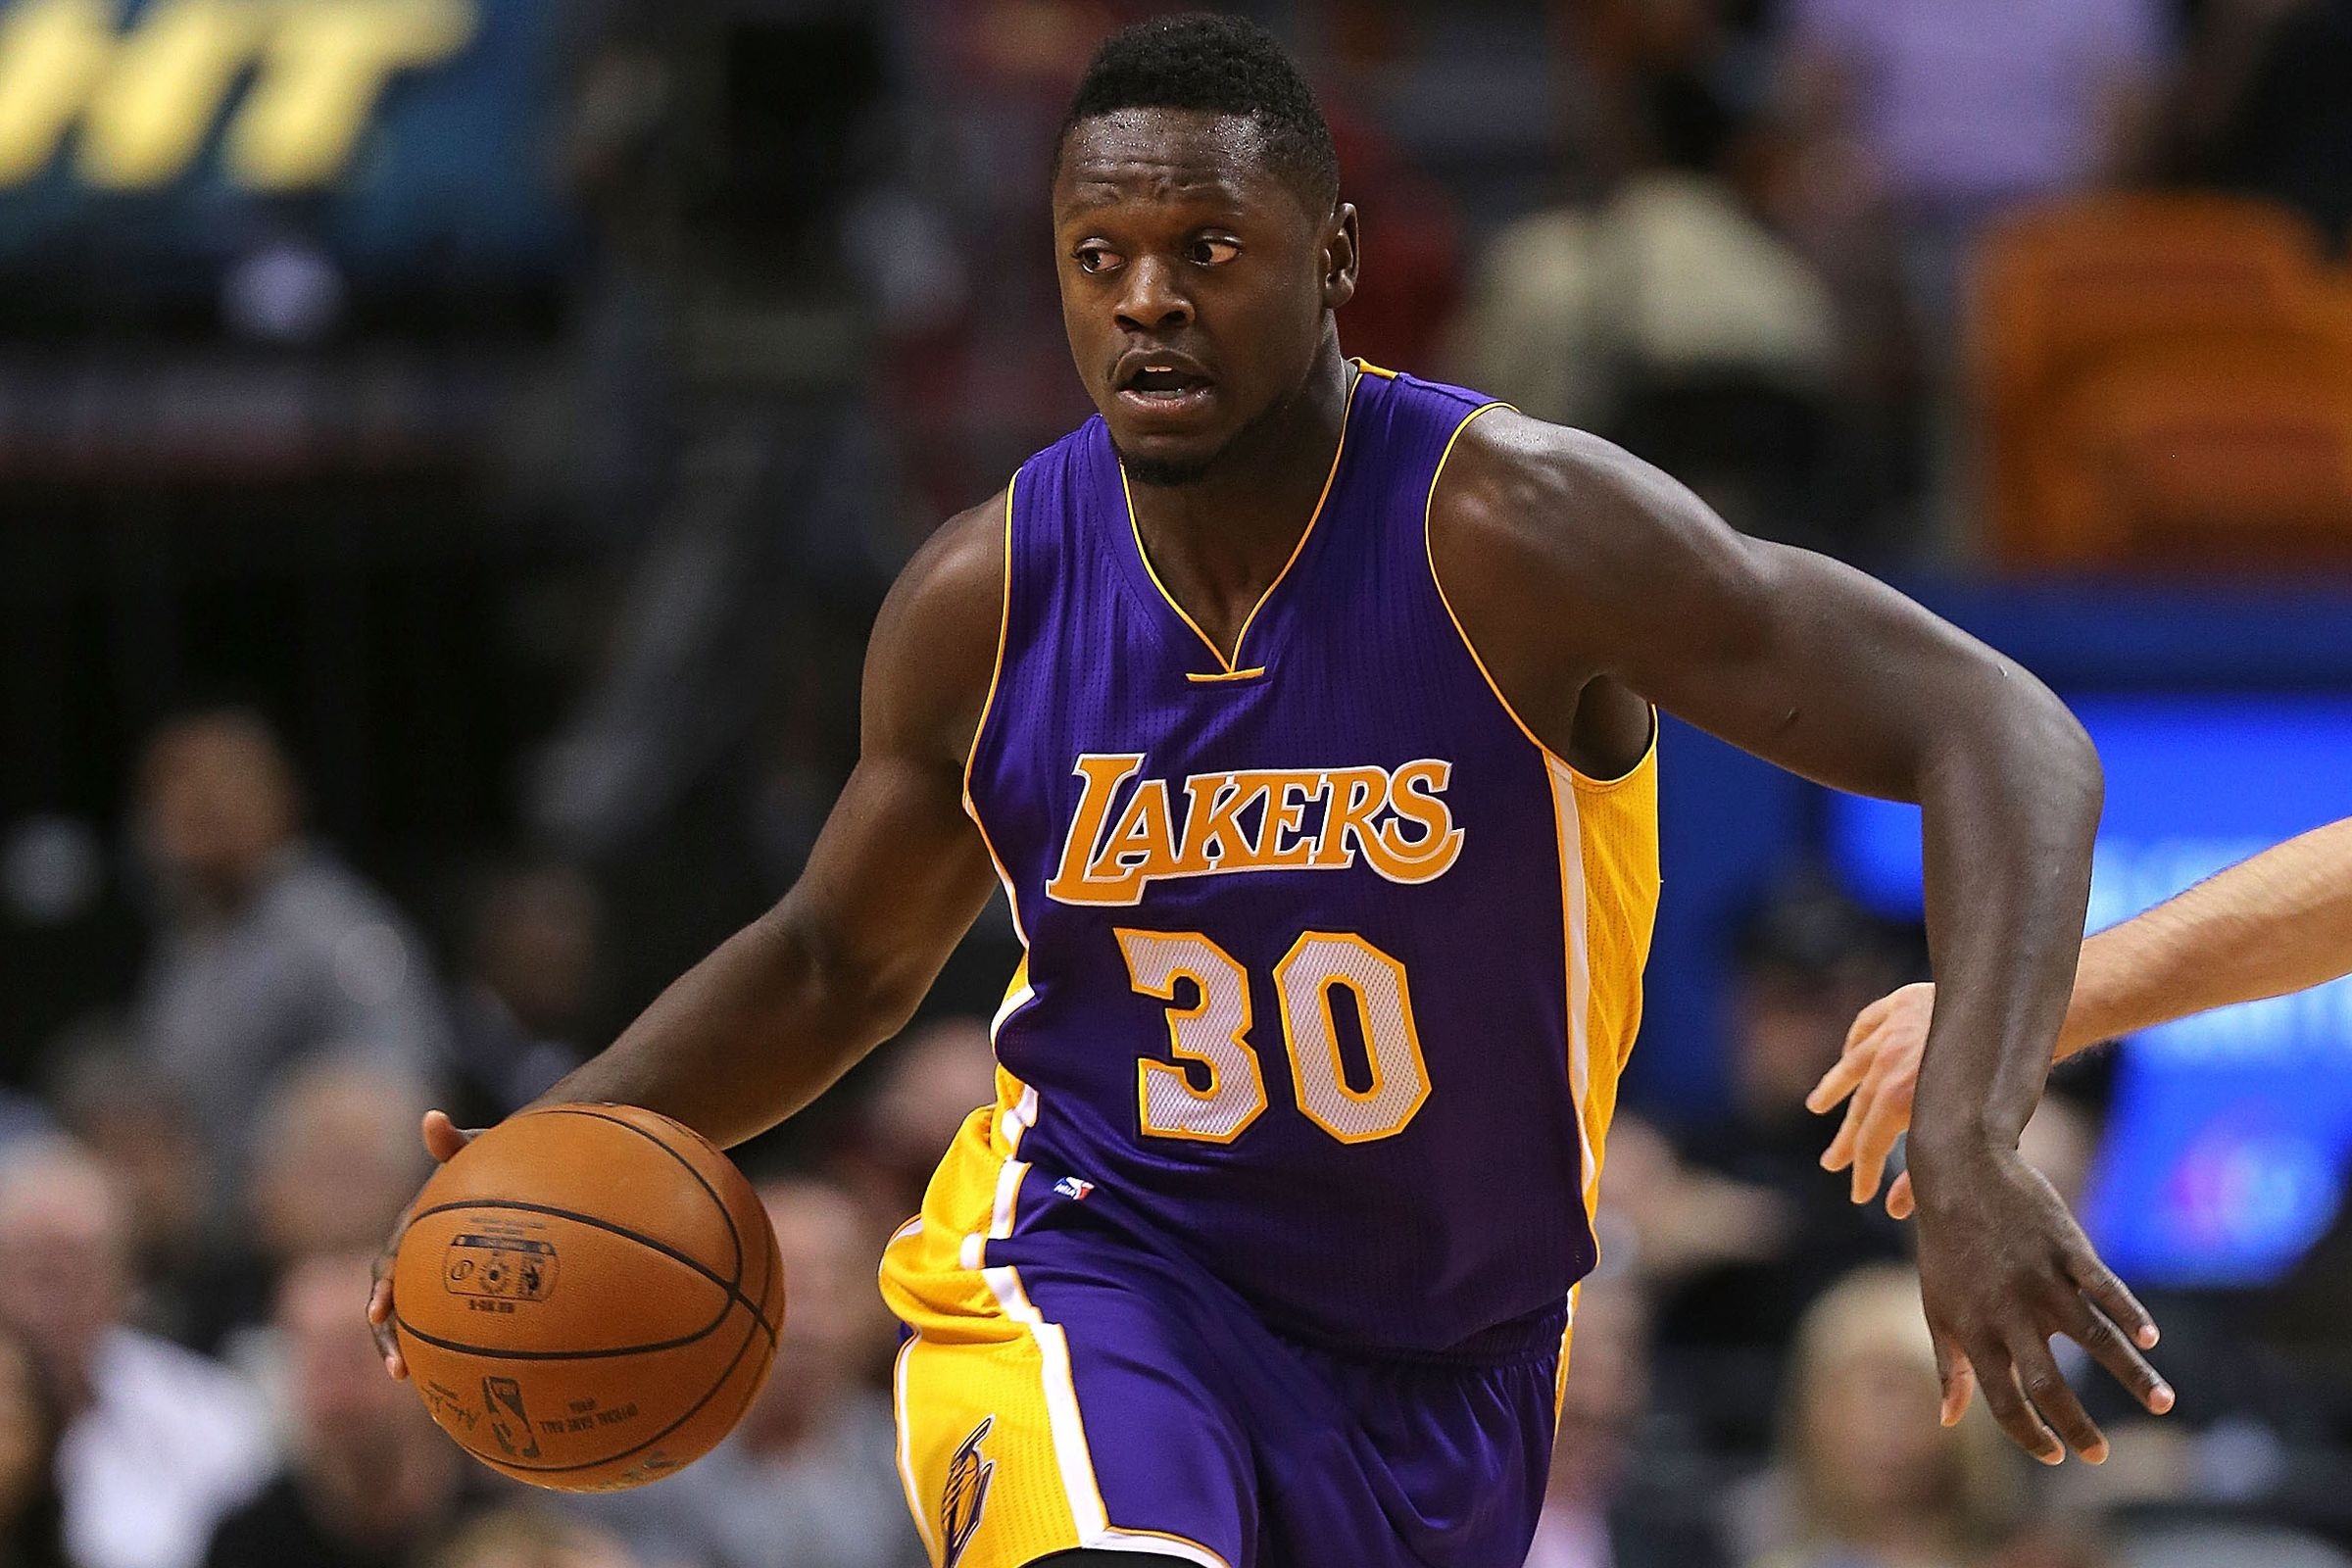 D'Angelo Russell may be struggling, but Julius Randle is shining